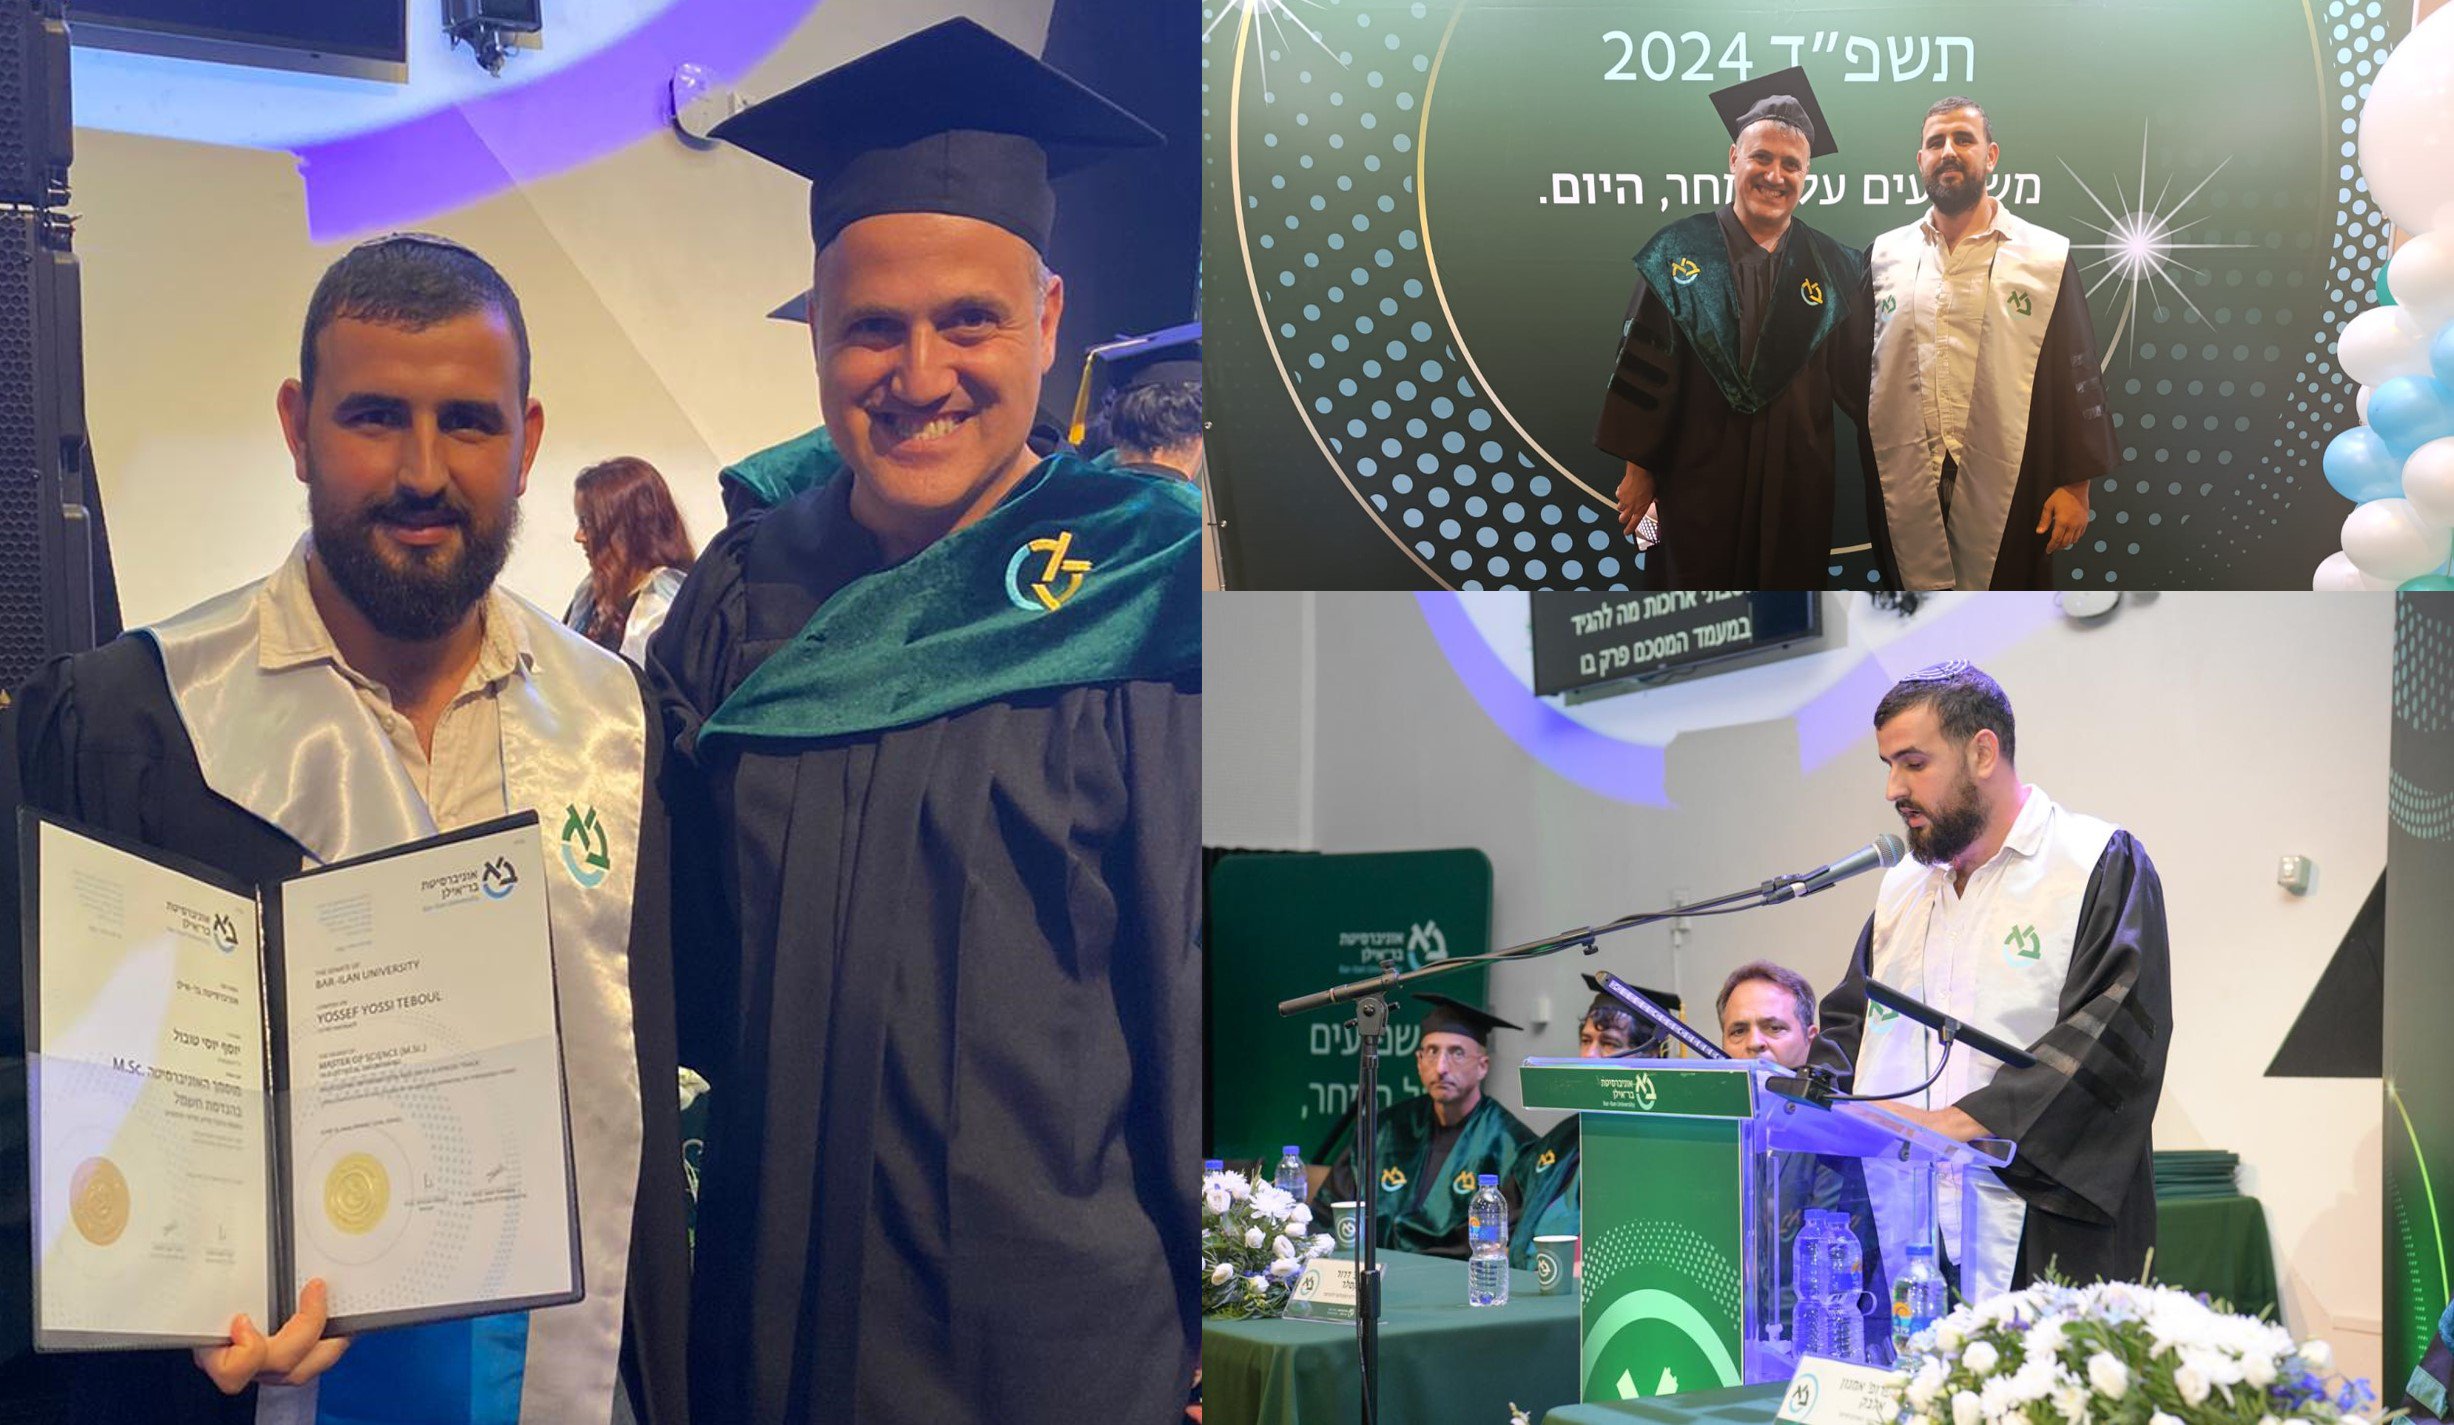 Congratulations to our former lab member, Mr. Yossef Teubul (Yossi), who has just received his M.Sc. degree in Electrical Engineering. We are proud that Yossi has been chosen to speak at the commencement ceremony as one of the representatives of the class of 2024.